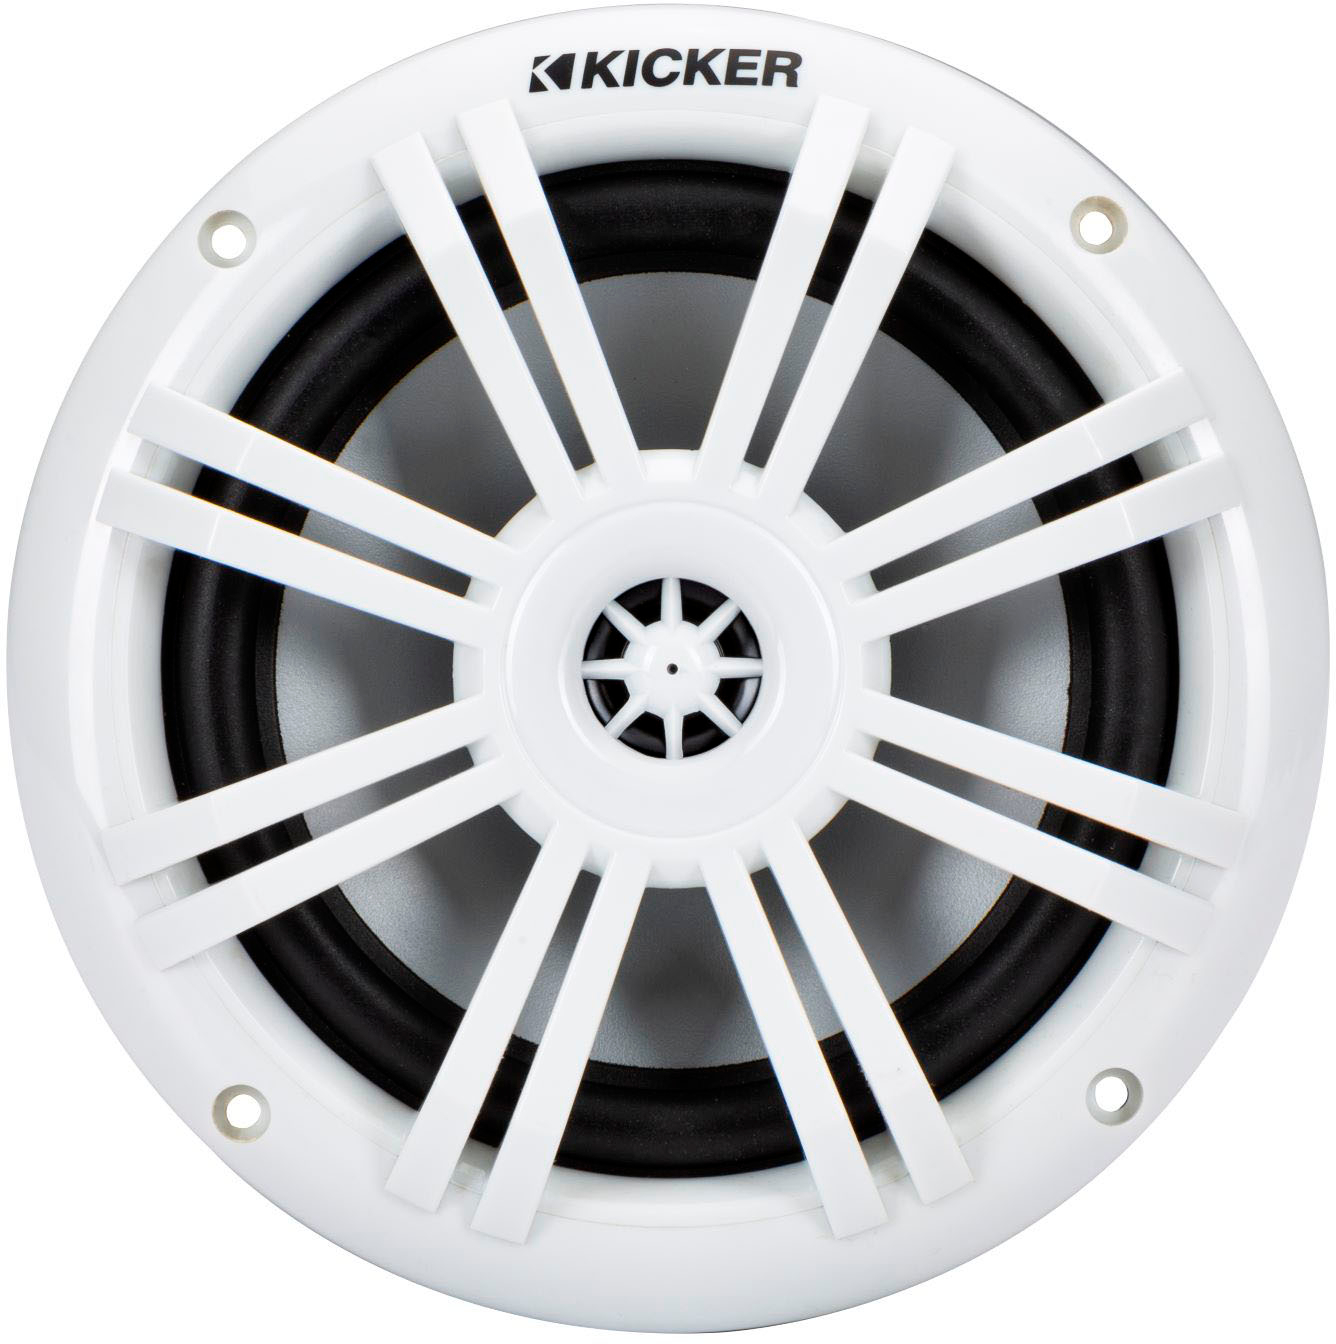 Angle View: KICKER - 9" 2-Way Marine Speakers with Polypropylene Cones (Pair) - White